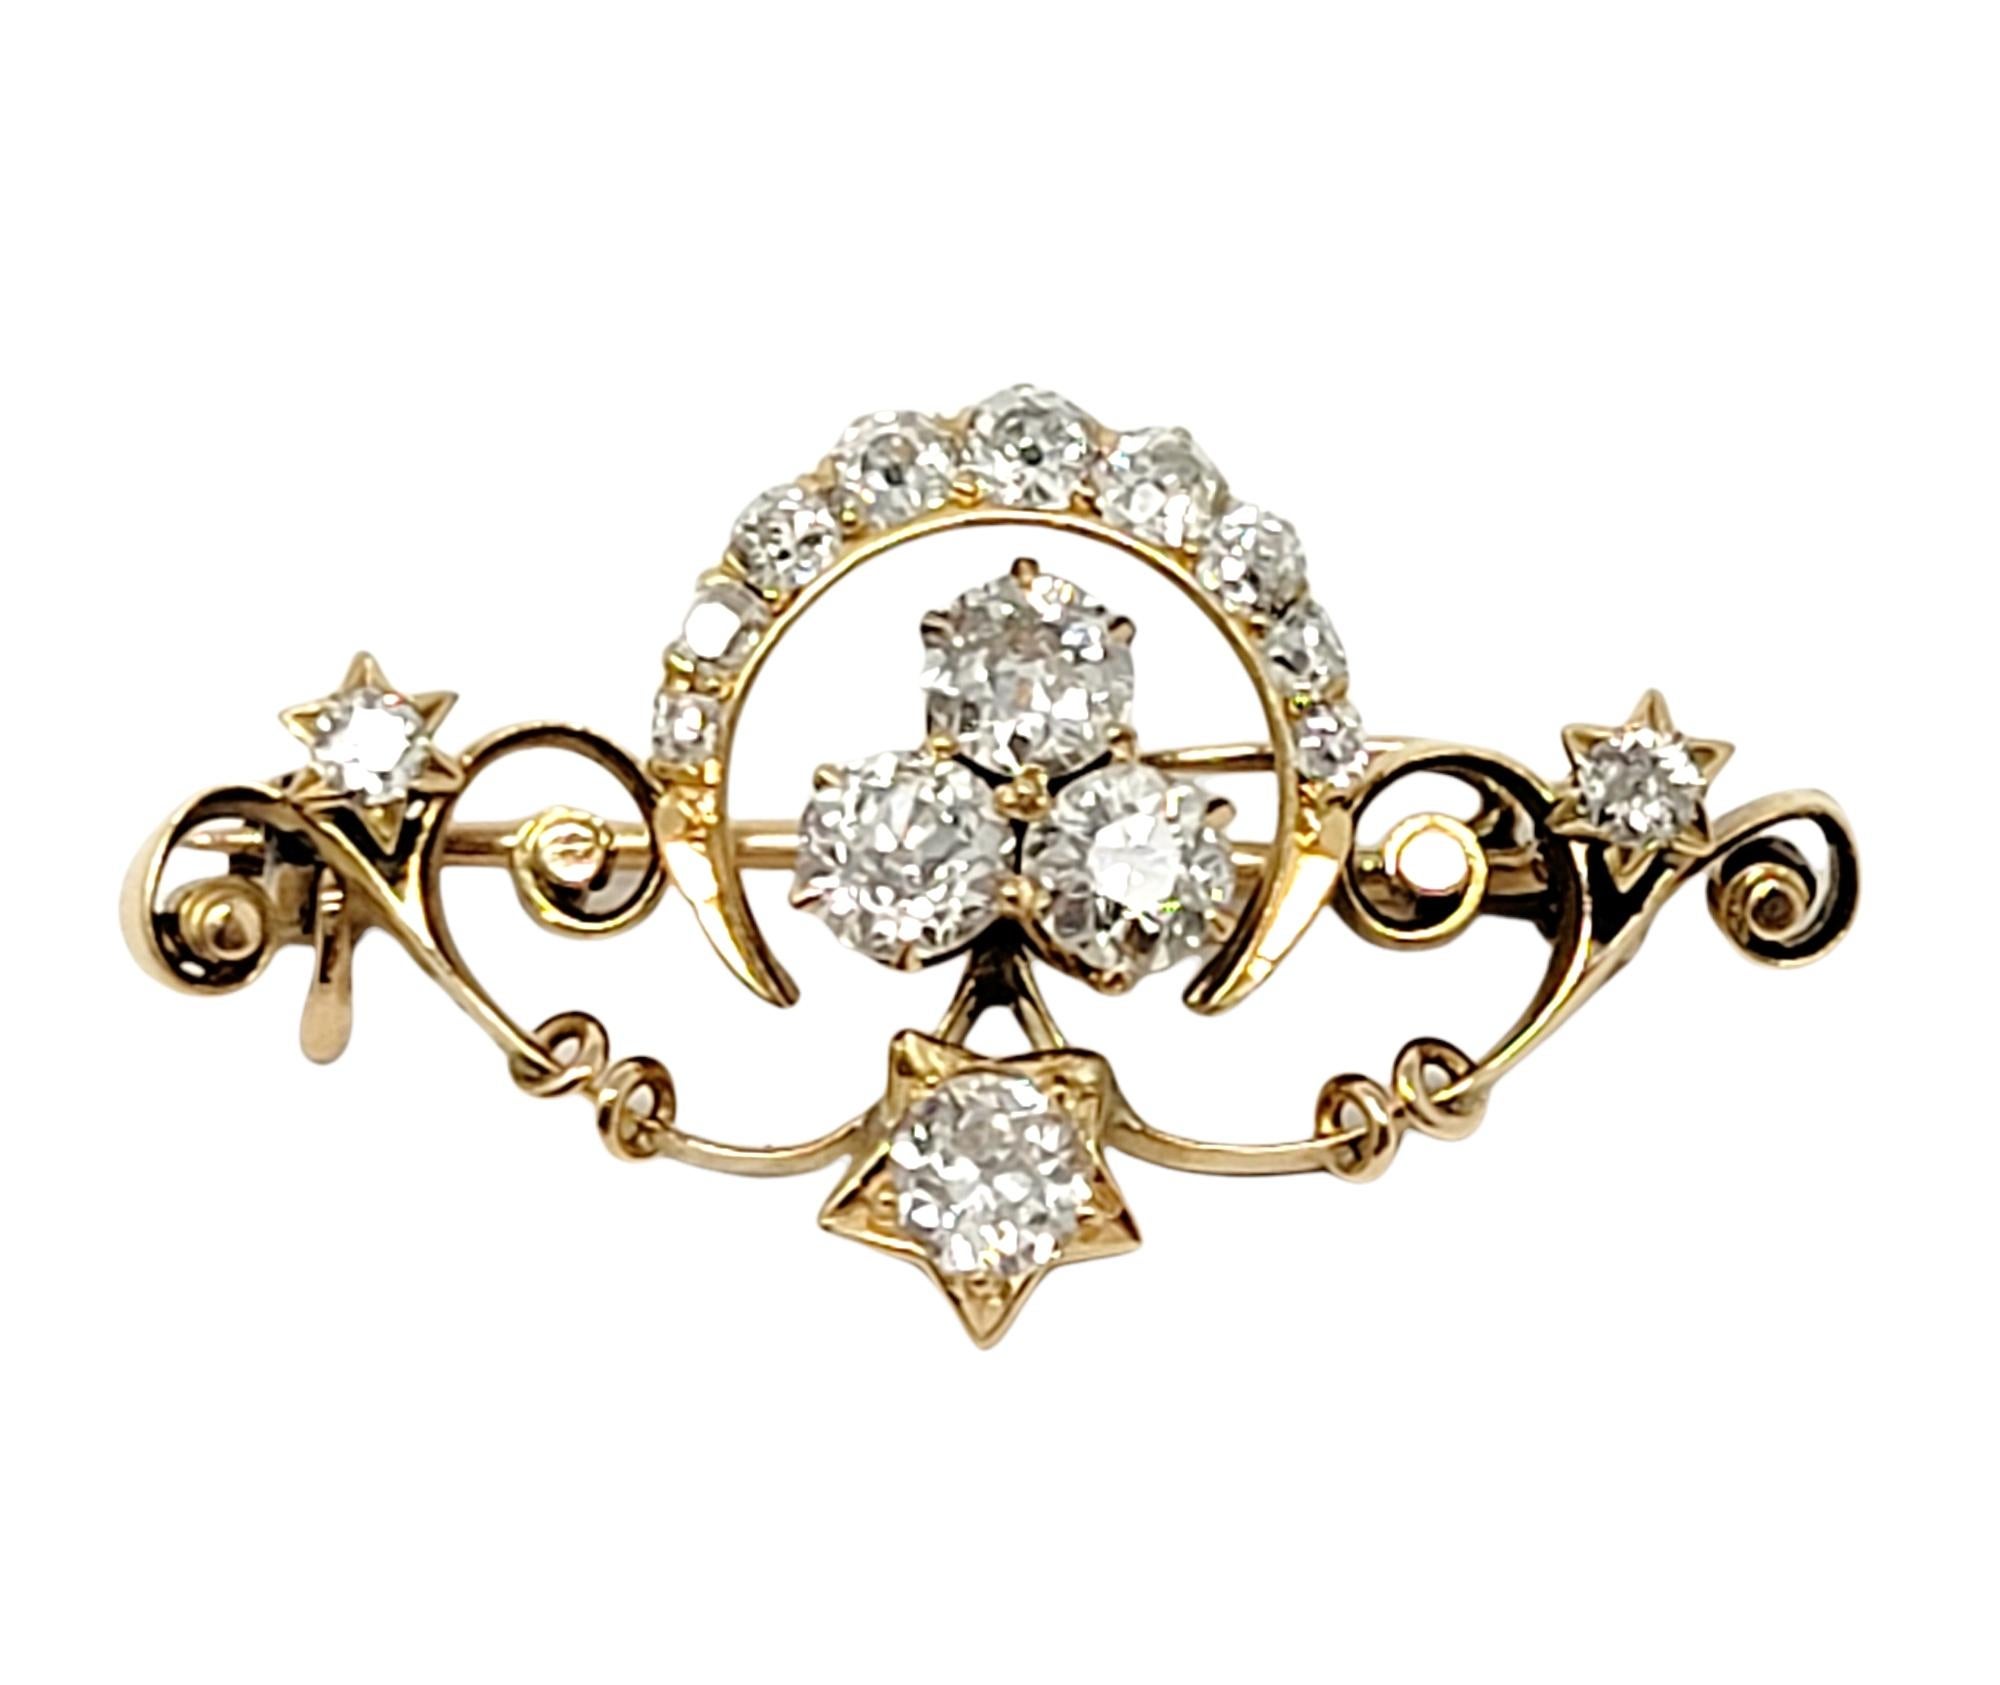 Stunning vintage brooch with a unique celestial design and glittering natural diamonds.

Metal: 14 Yellow Gold
Closure: Hinged stick pin
Natural Diamonds: 1.13 ctw 
Diamond Cut: Old European
Diamond Color: G-H
Diamond Clarity: VS1-VS2
Length: